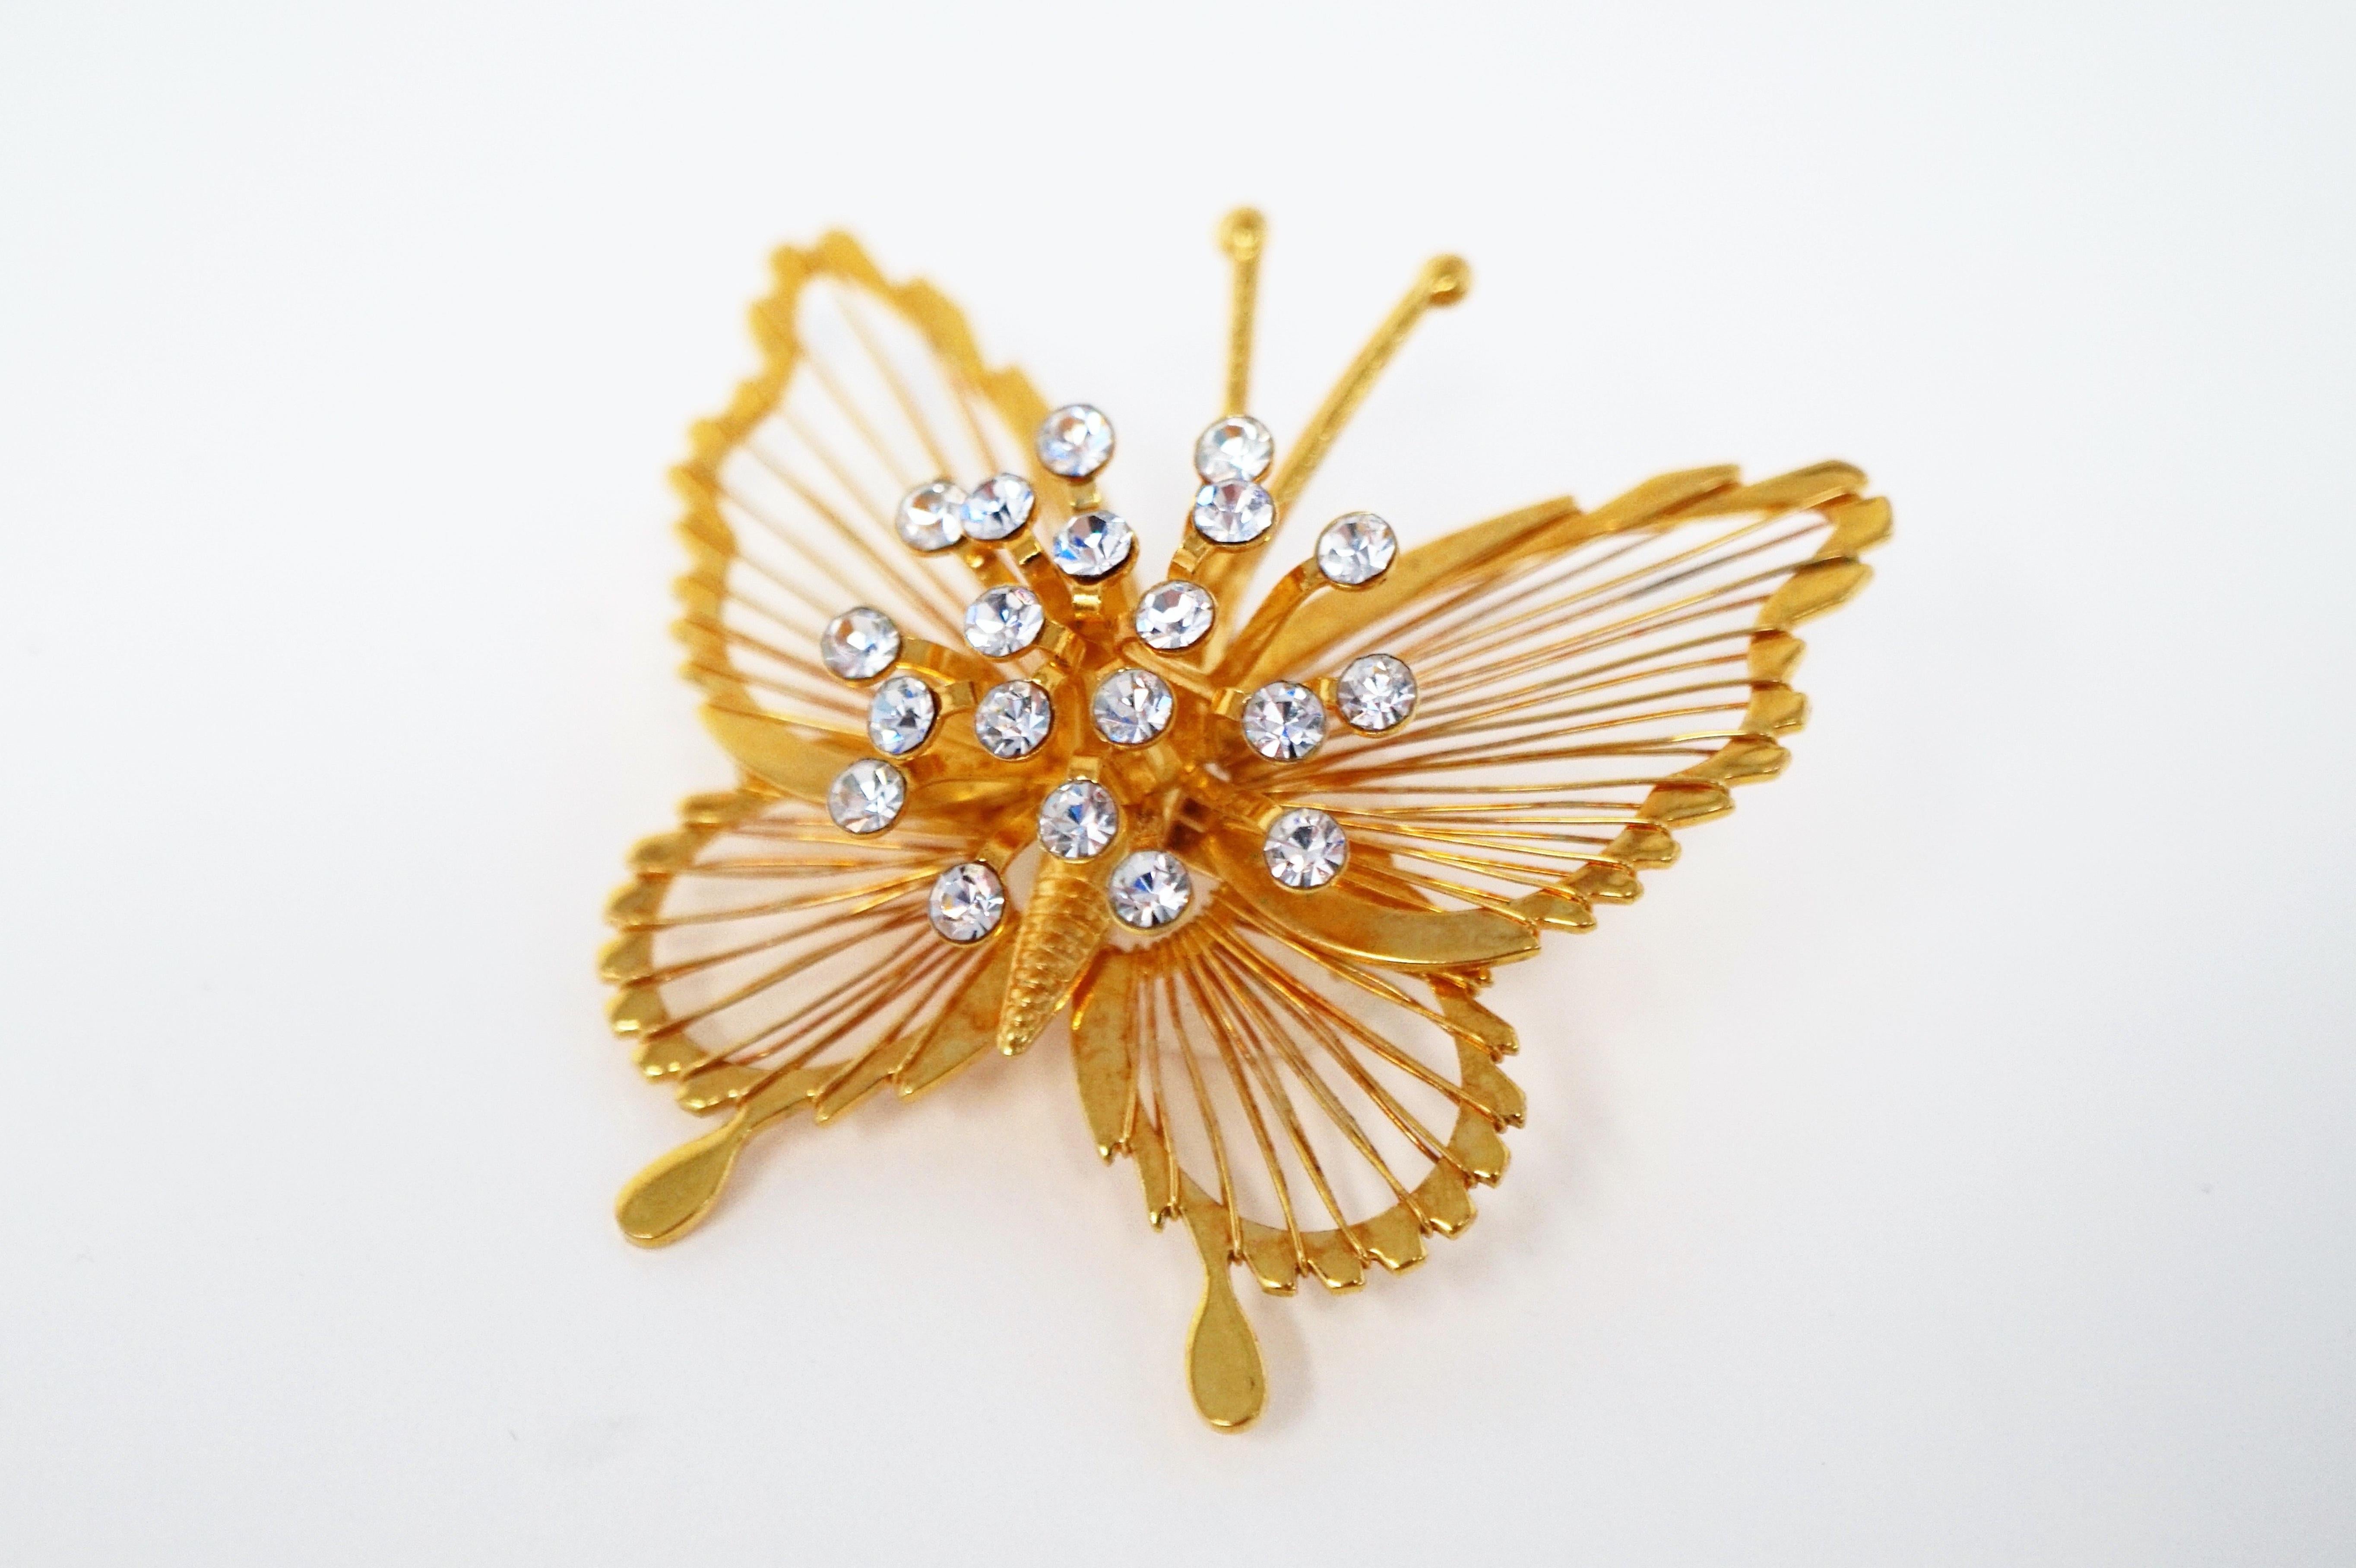 Modern Monet 1970s Gilded Butterfly Brooch with Crystal Rhinestones, Signed